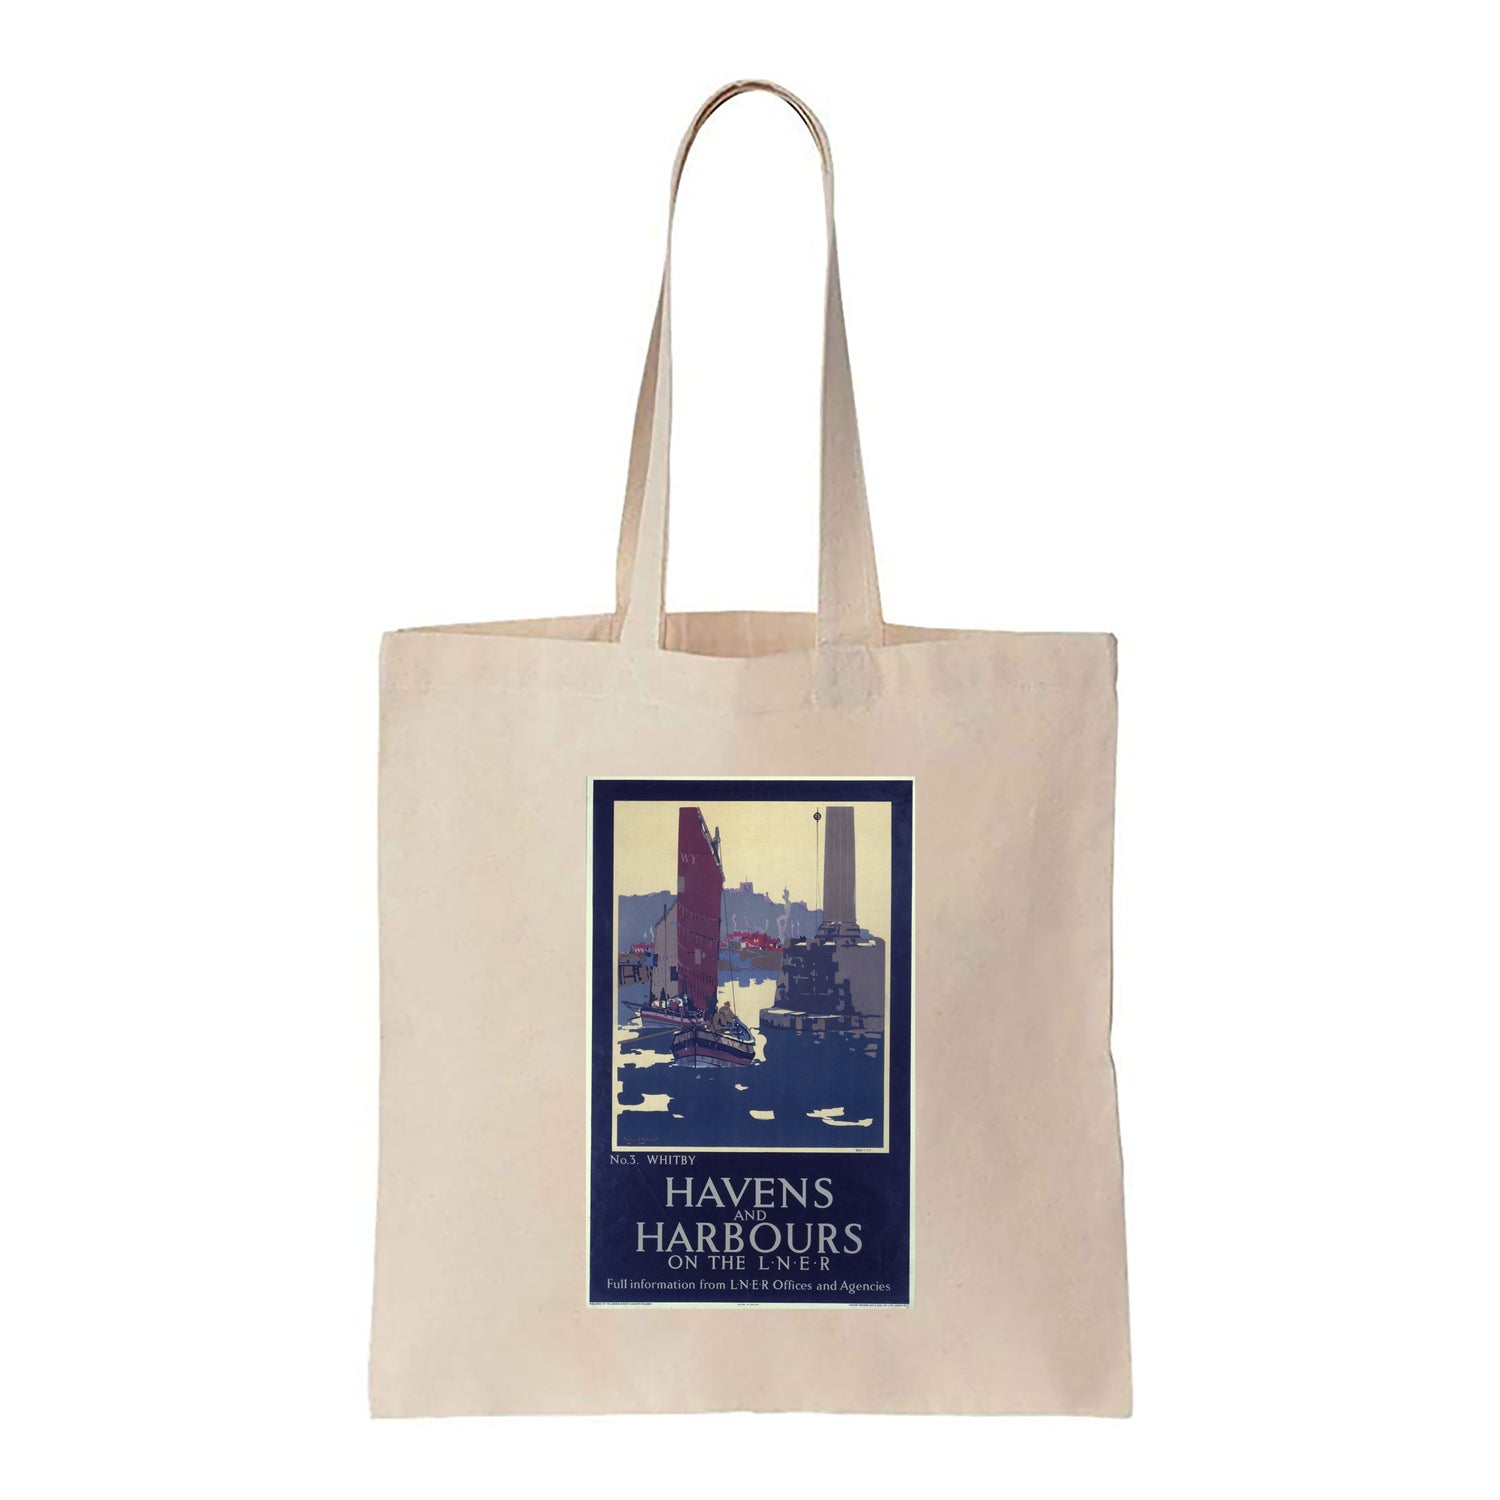 Havens and Harbours No 3 Whitby - LNER - Canvas Tote Bag